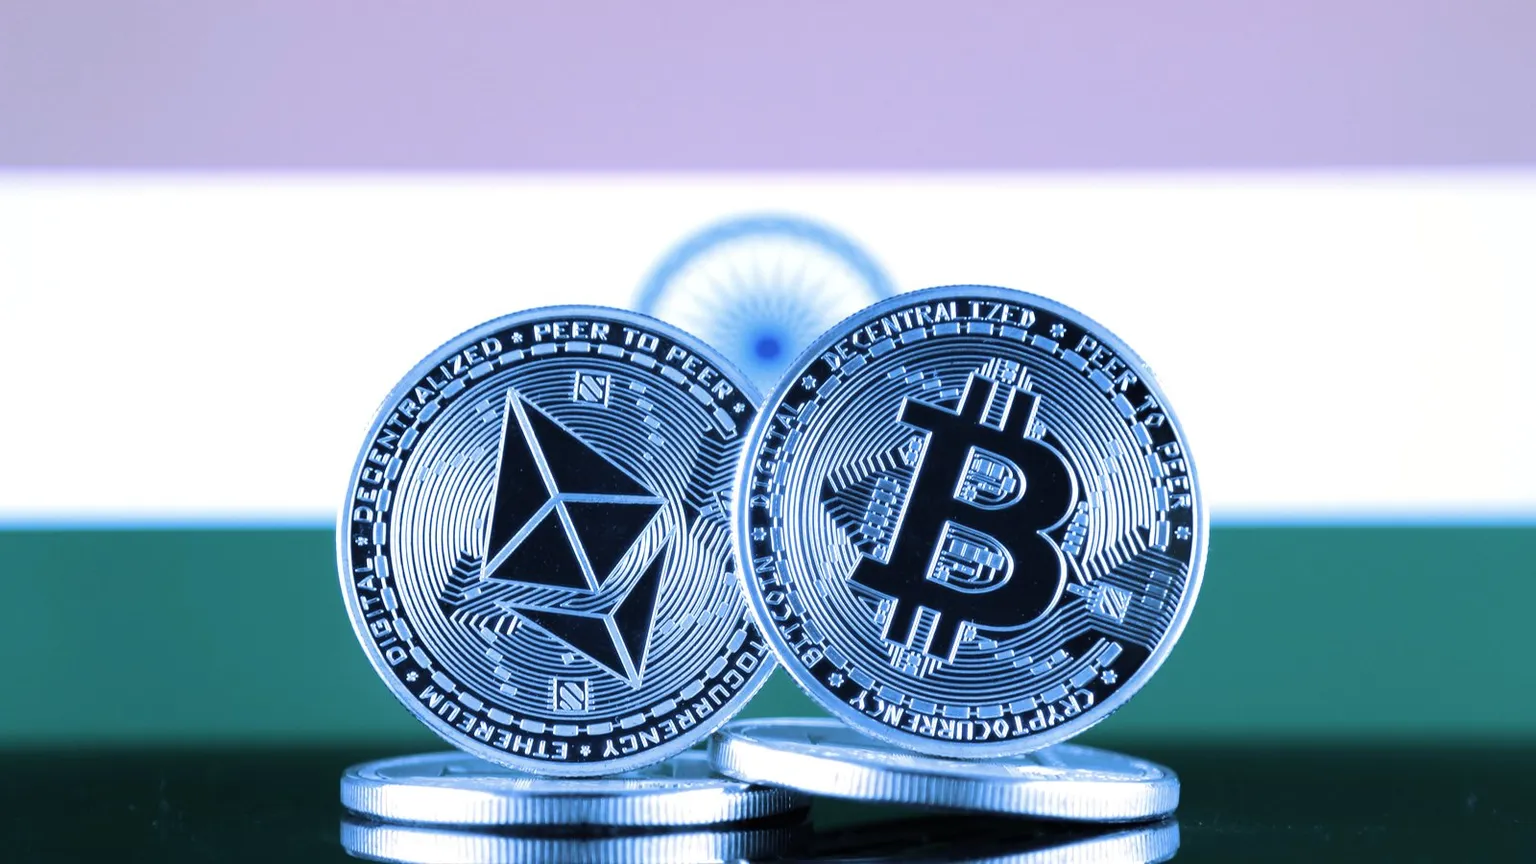 Cryptocurrencies are growing in popularity in India. Image: Shutterstock.